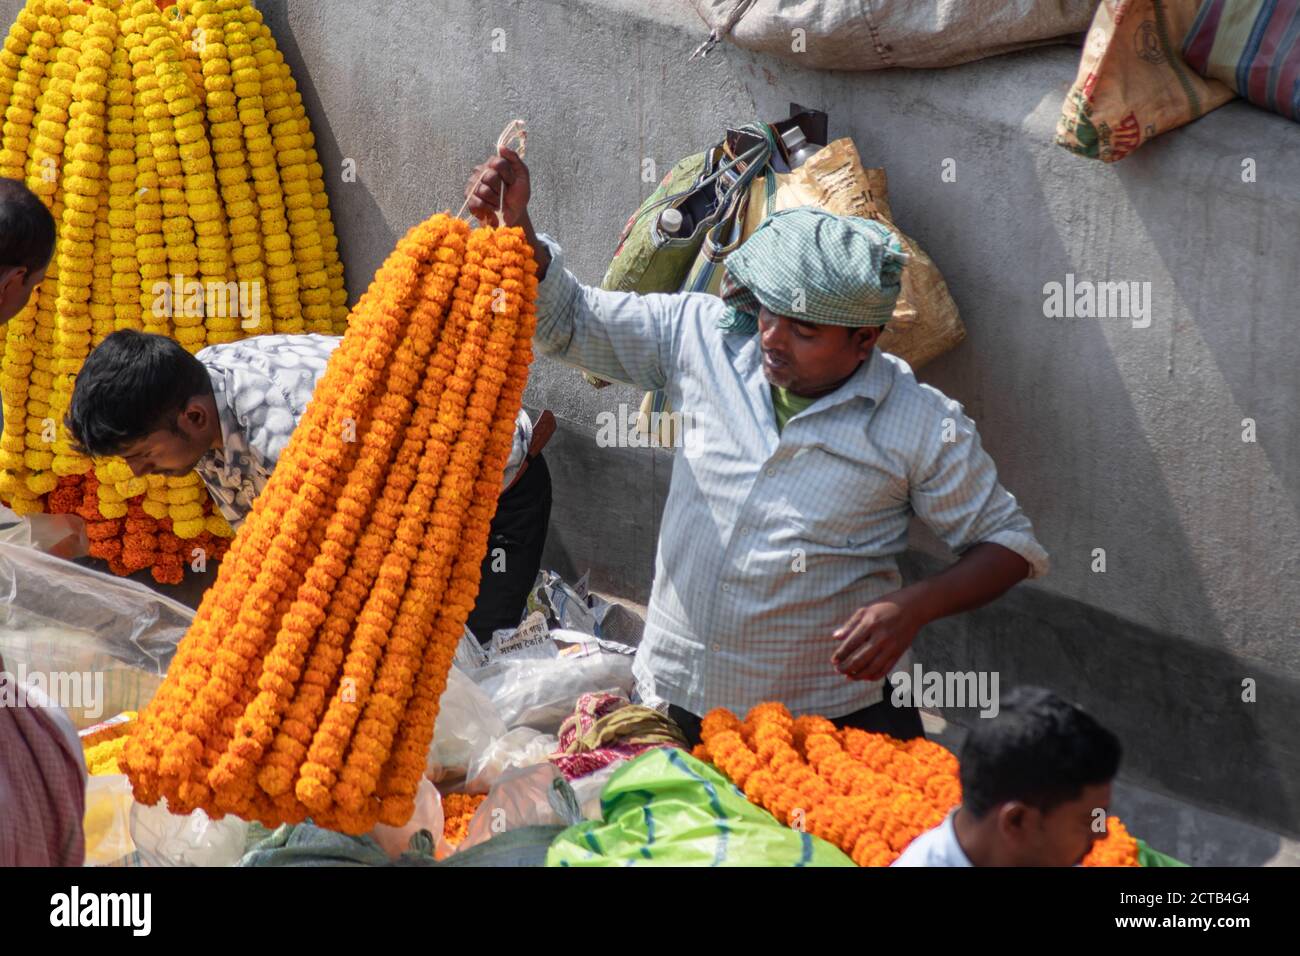 Kolkata, India - February 2, 2020: Unidentified people attends Mallick Ghat flower market by Howrah bridge to buy and sell colorful marigold flowers Stock Photo